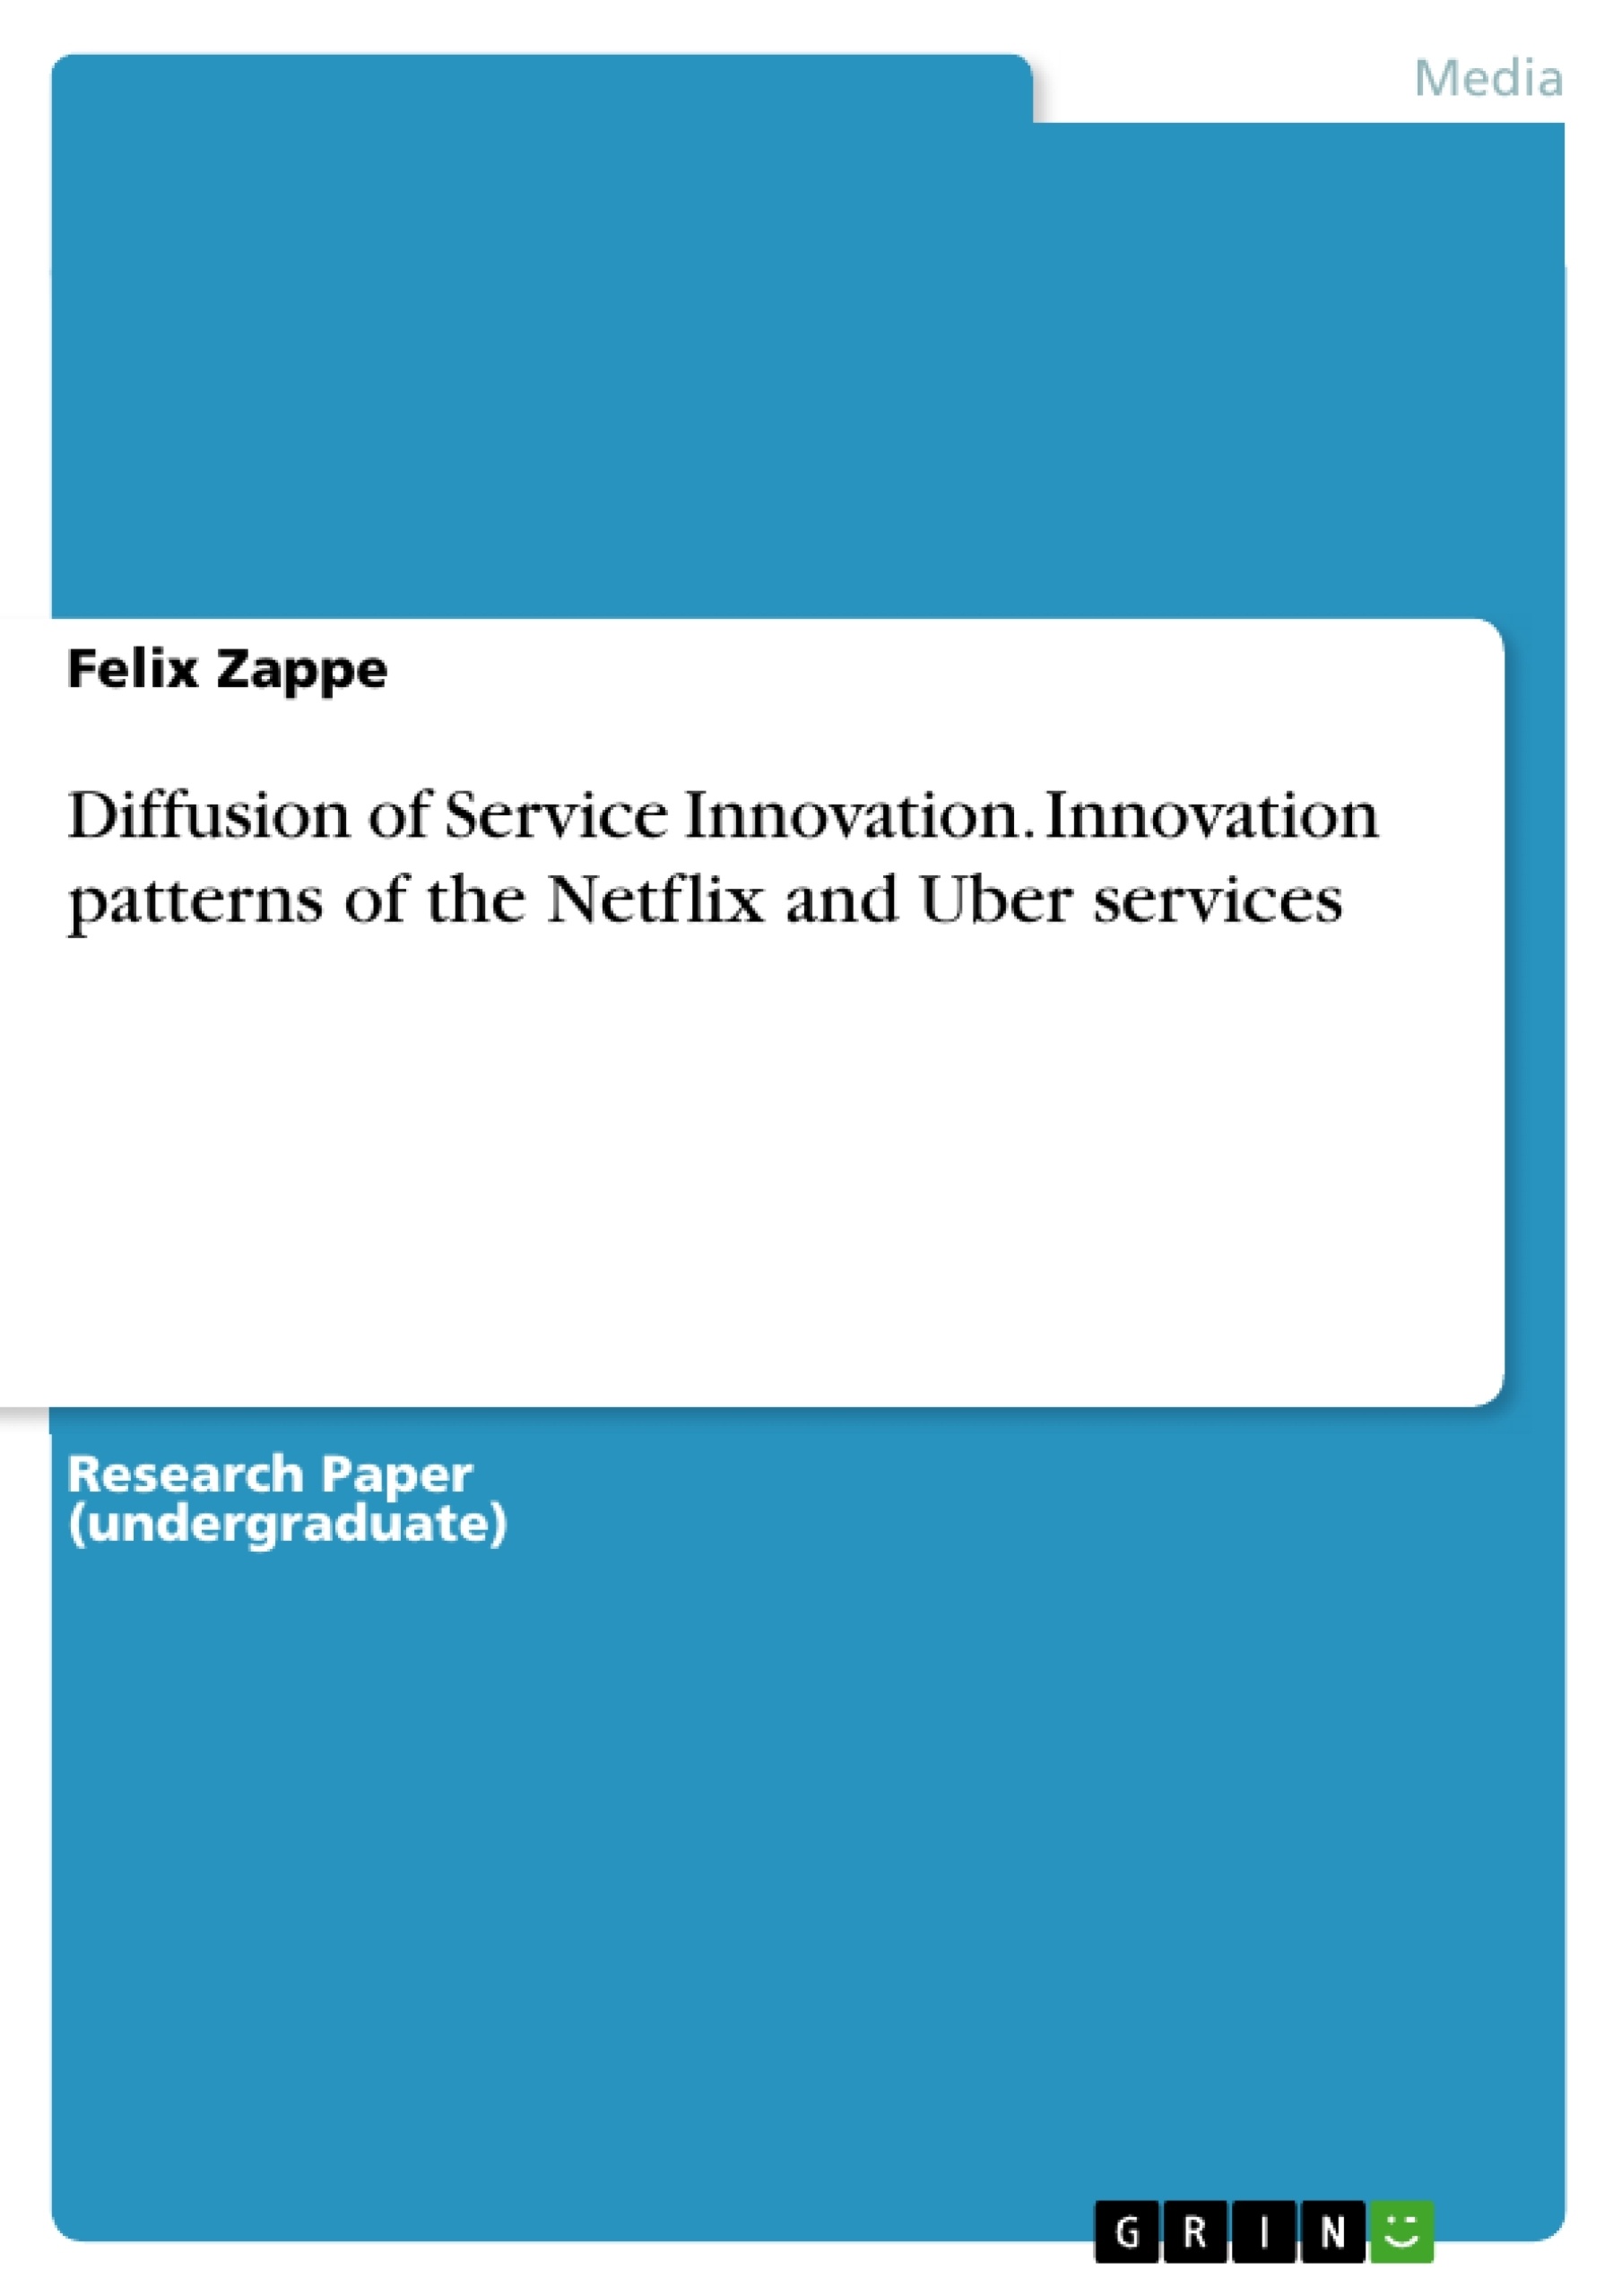 Titel: Diffusion of Service Innovation. Innovation patterns of the Netflix and Uber services